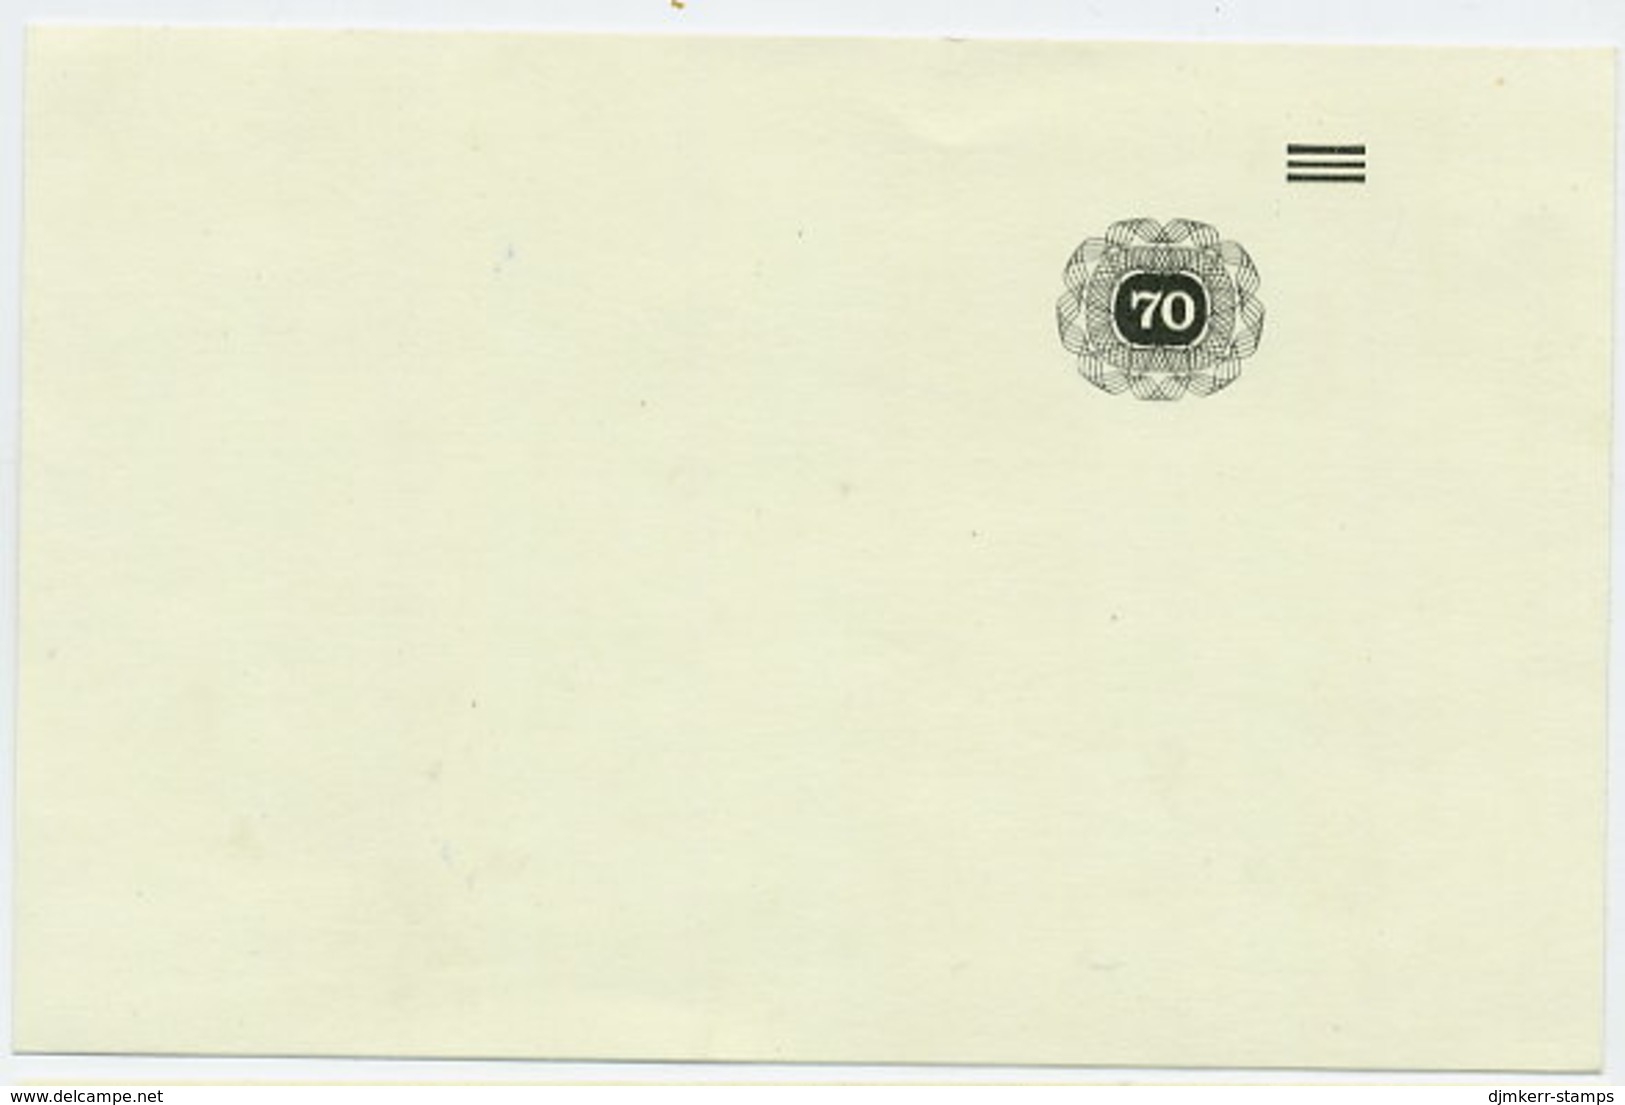 YUGOSLAVIA 1987 70d Surcharge On Blank Postcard, Error Or Proof.  As Michel P190A - Postal Stationery